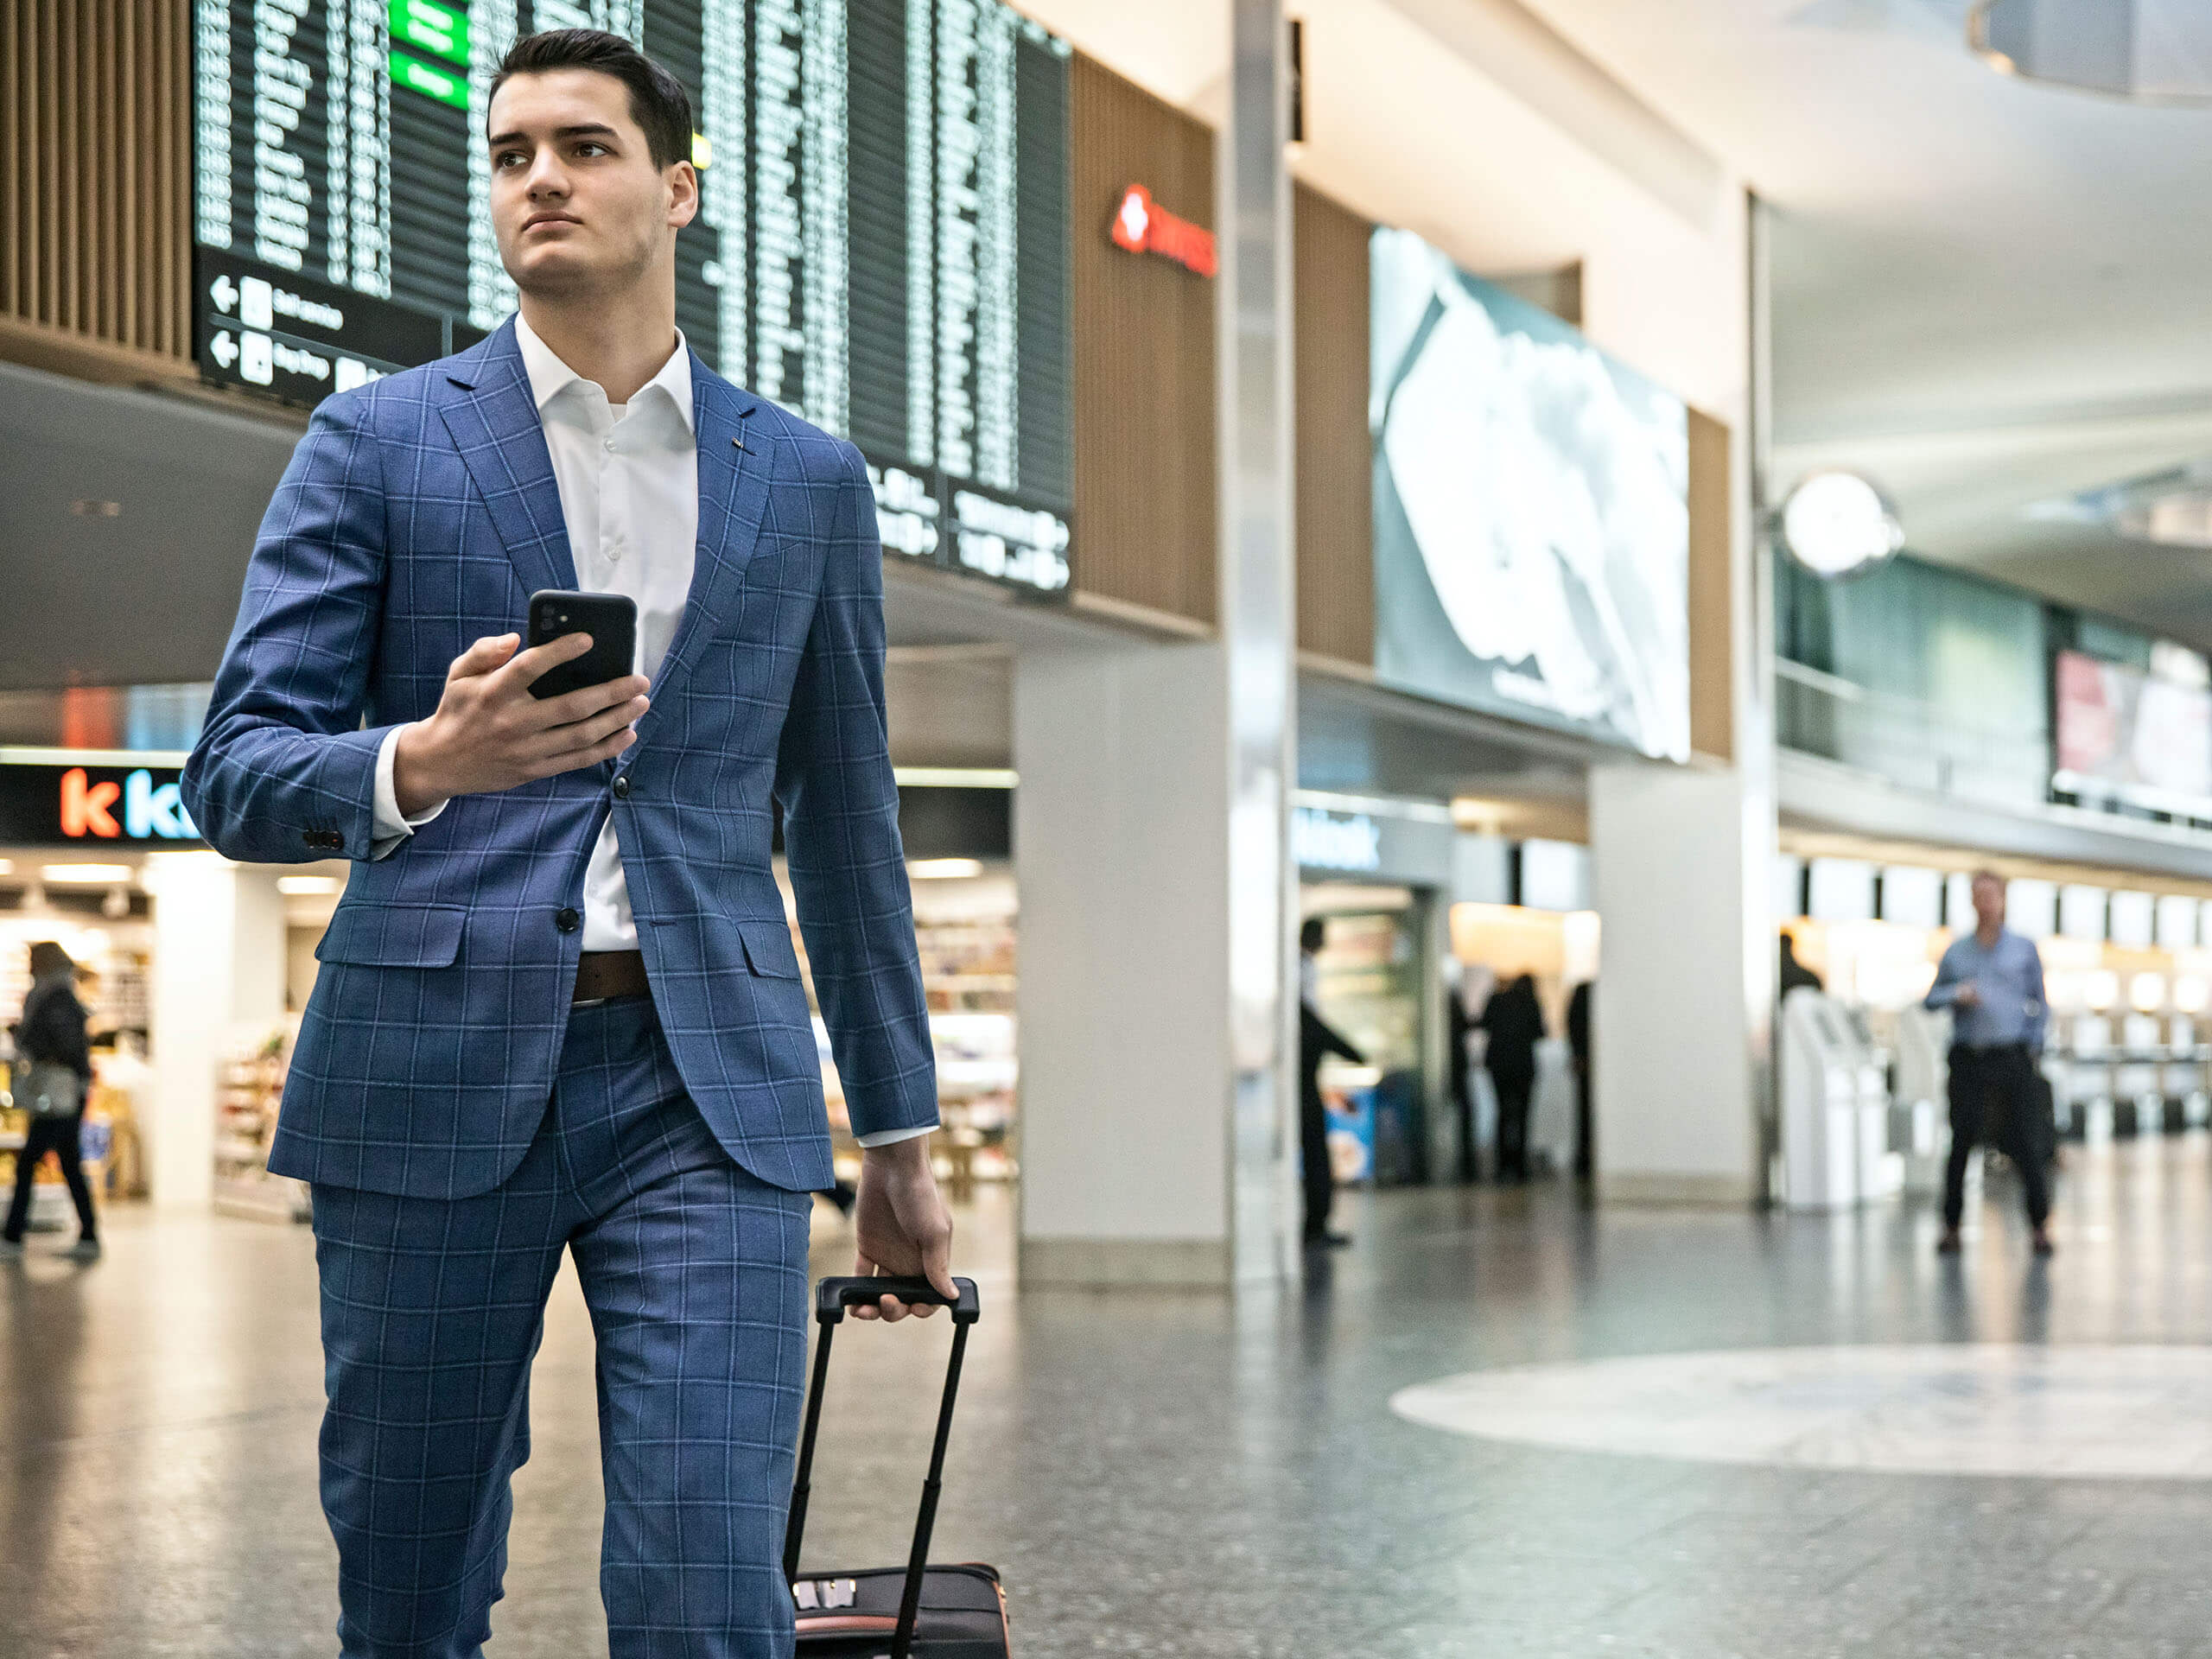 Man at the airport with mobile phone